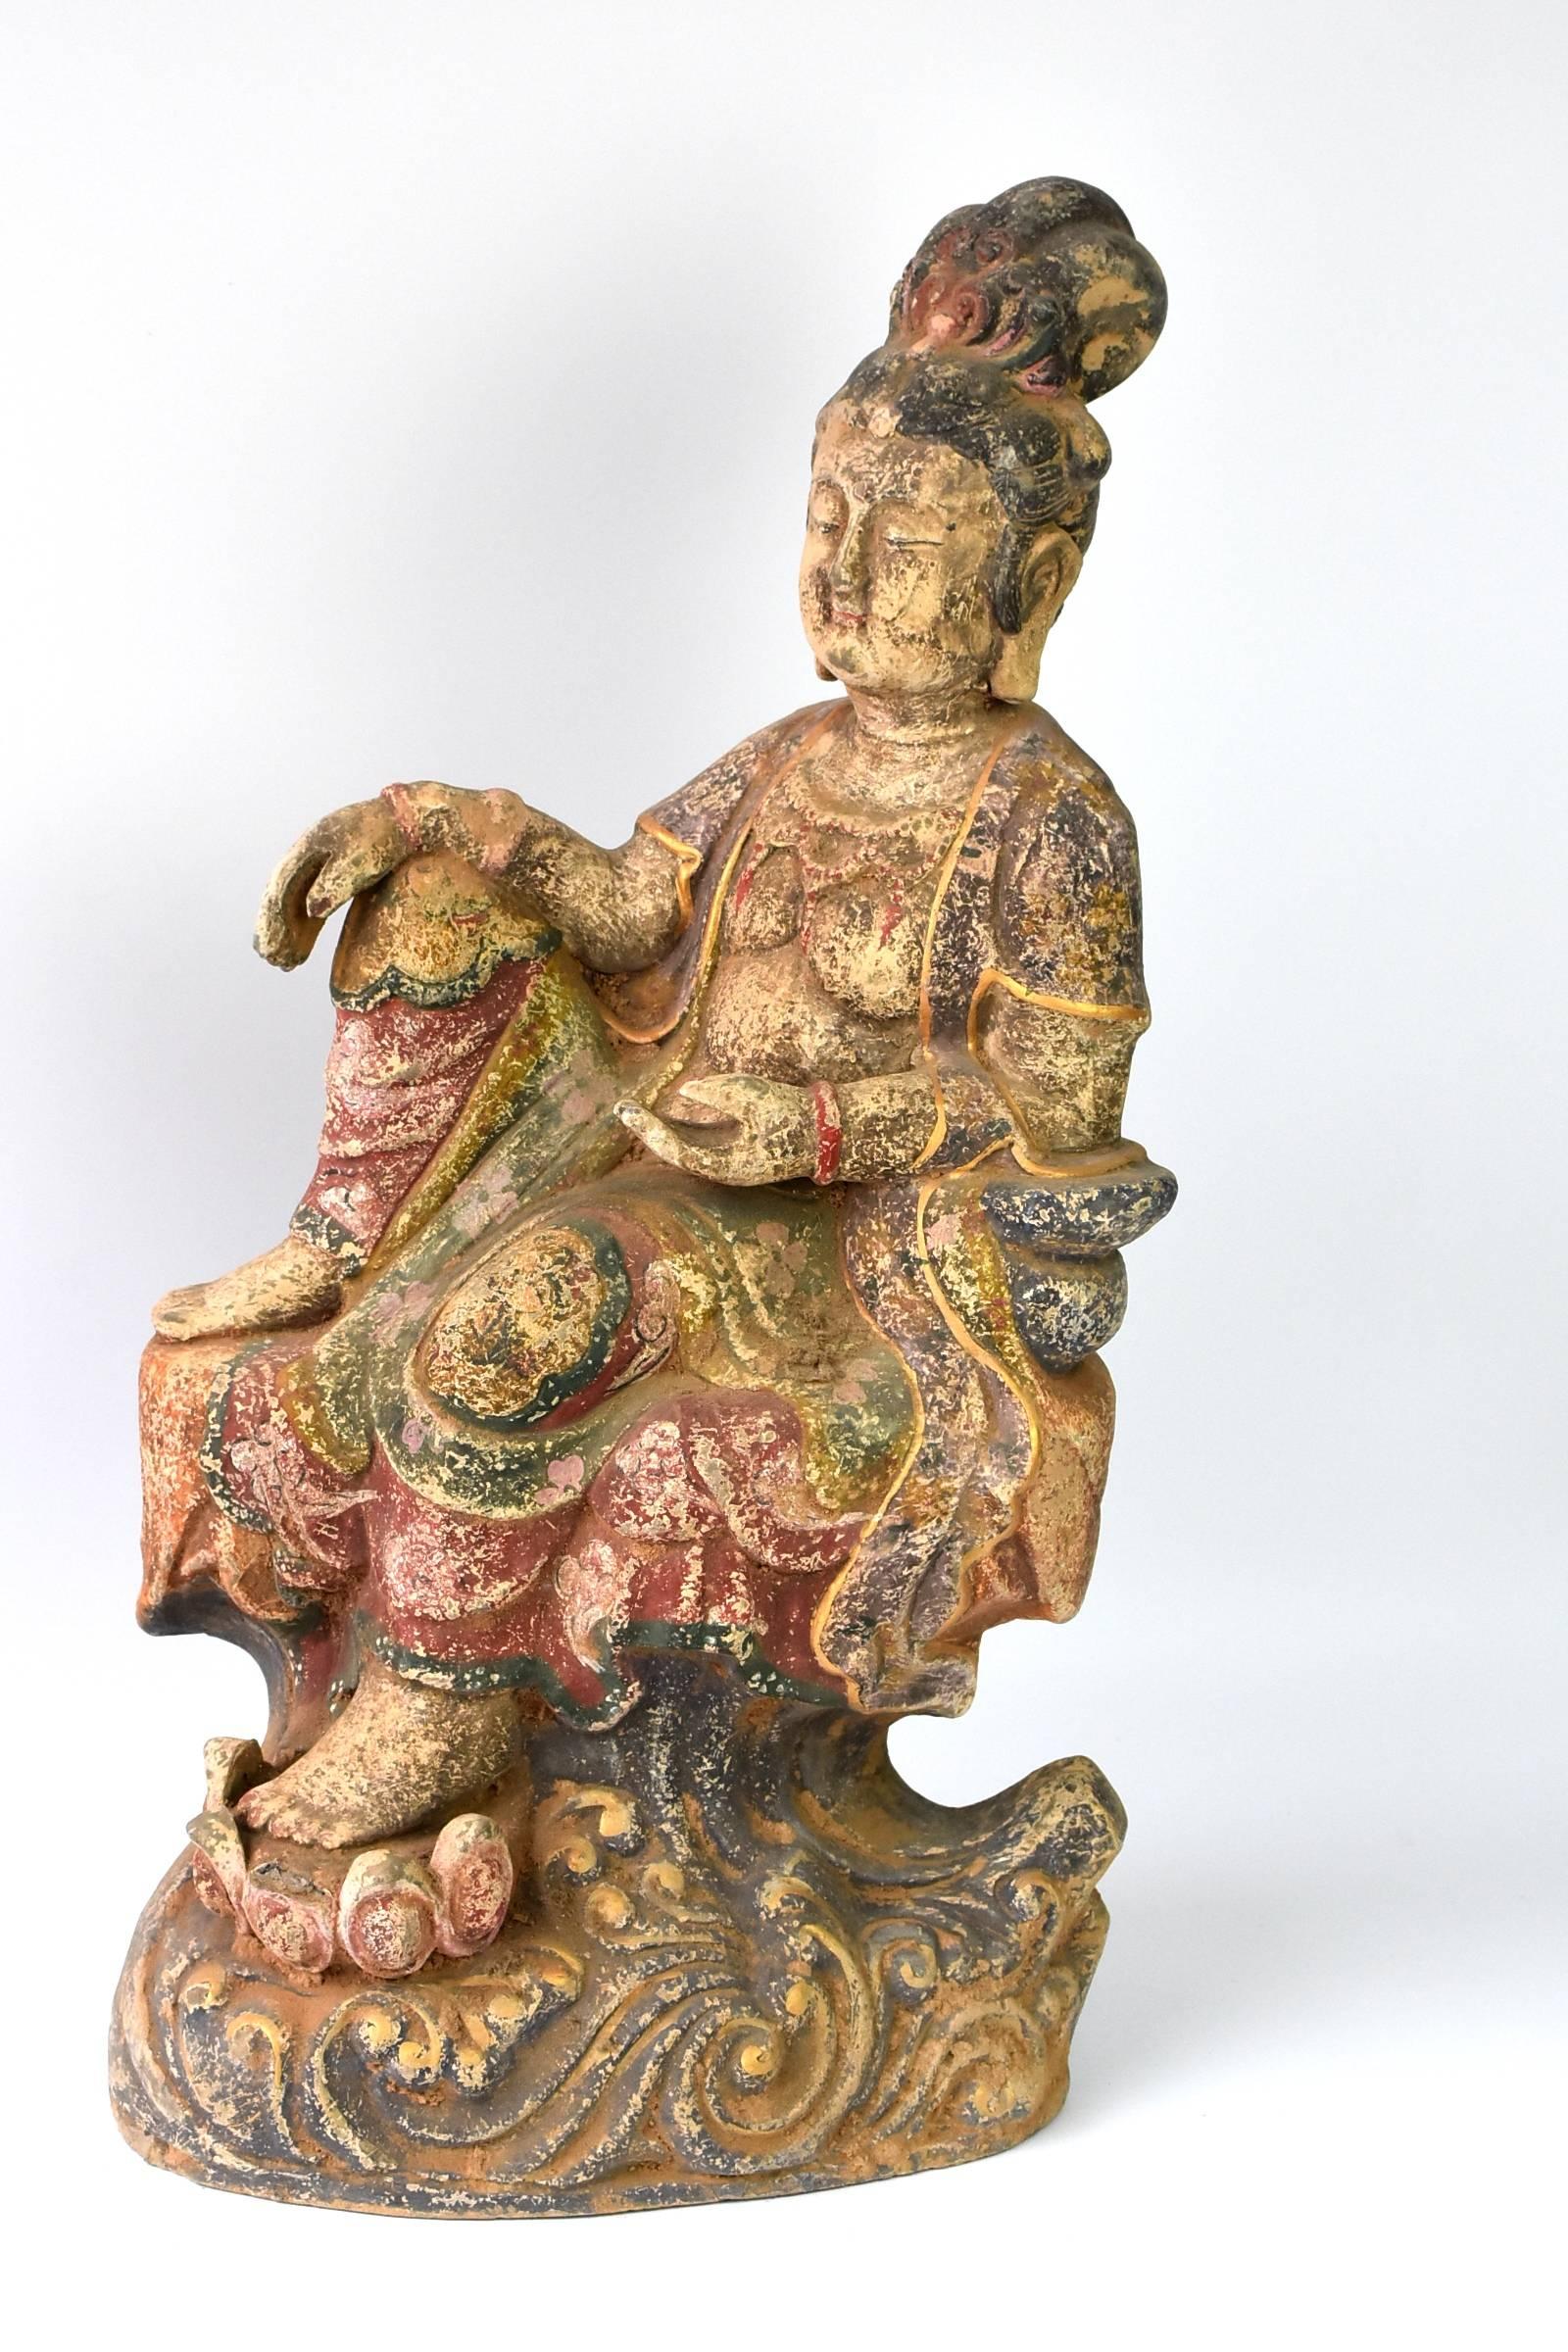 A fantastic terracotta piece featuring Bodhisattva Kwan Yin in a relaxed pose. Kwan Yin is the Goddess of Compassion, who takes away pain and blesses the devotees with good luck and great fortune. She is seated on a high pedestal with the ocean wave